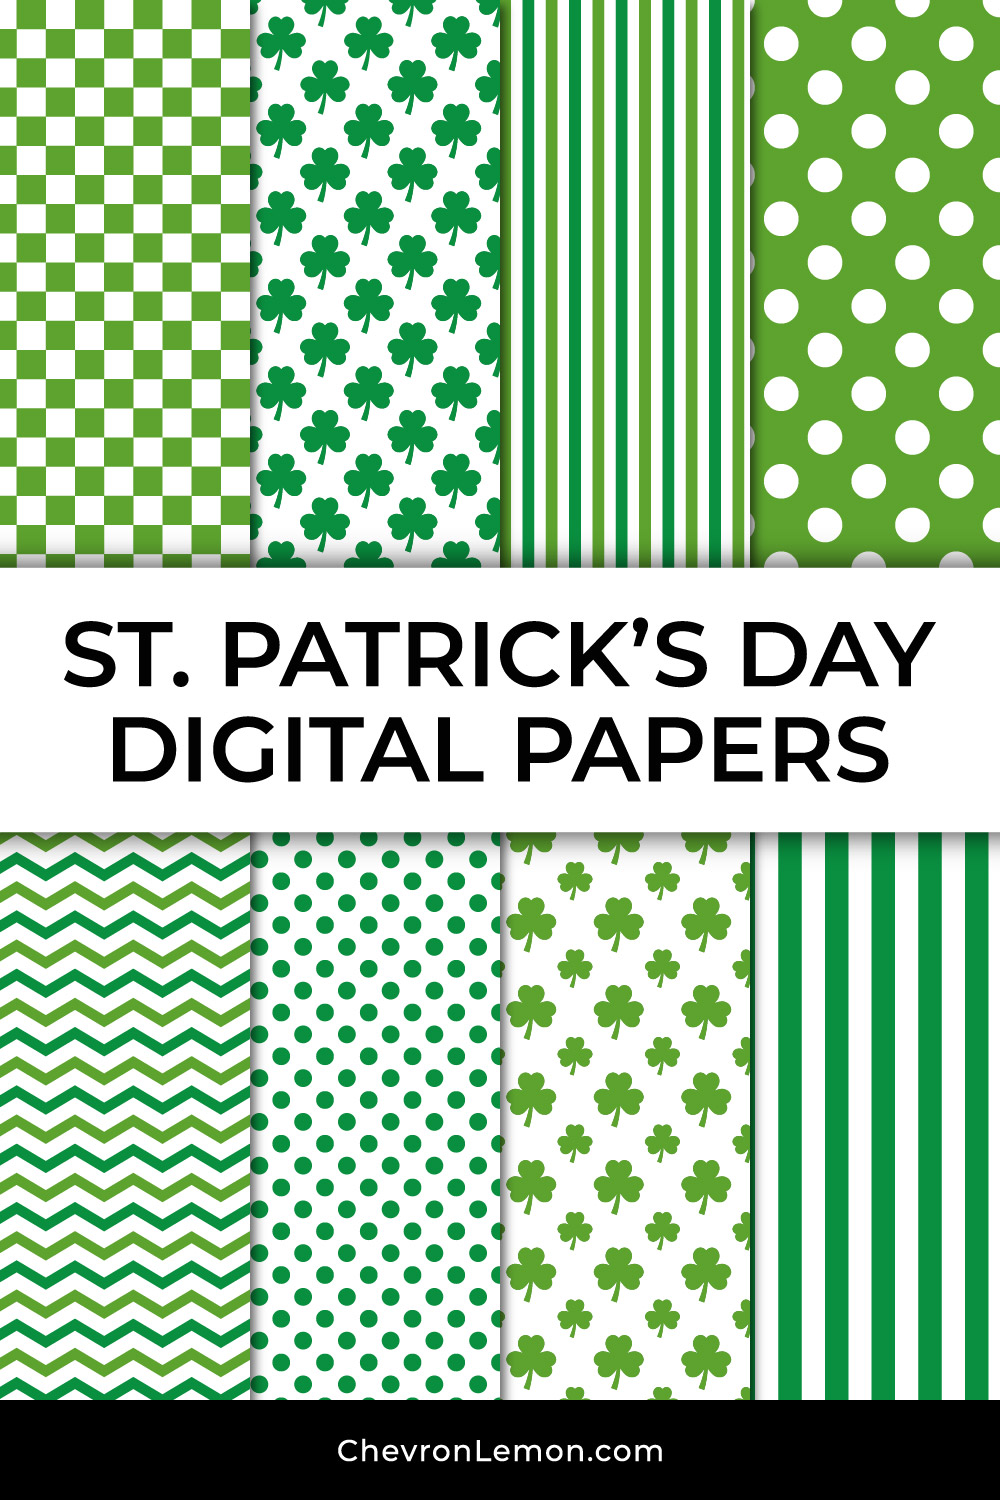 St. Patrick's Day digital papers